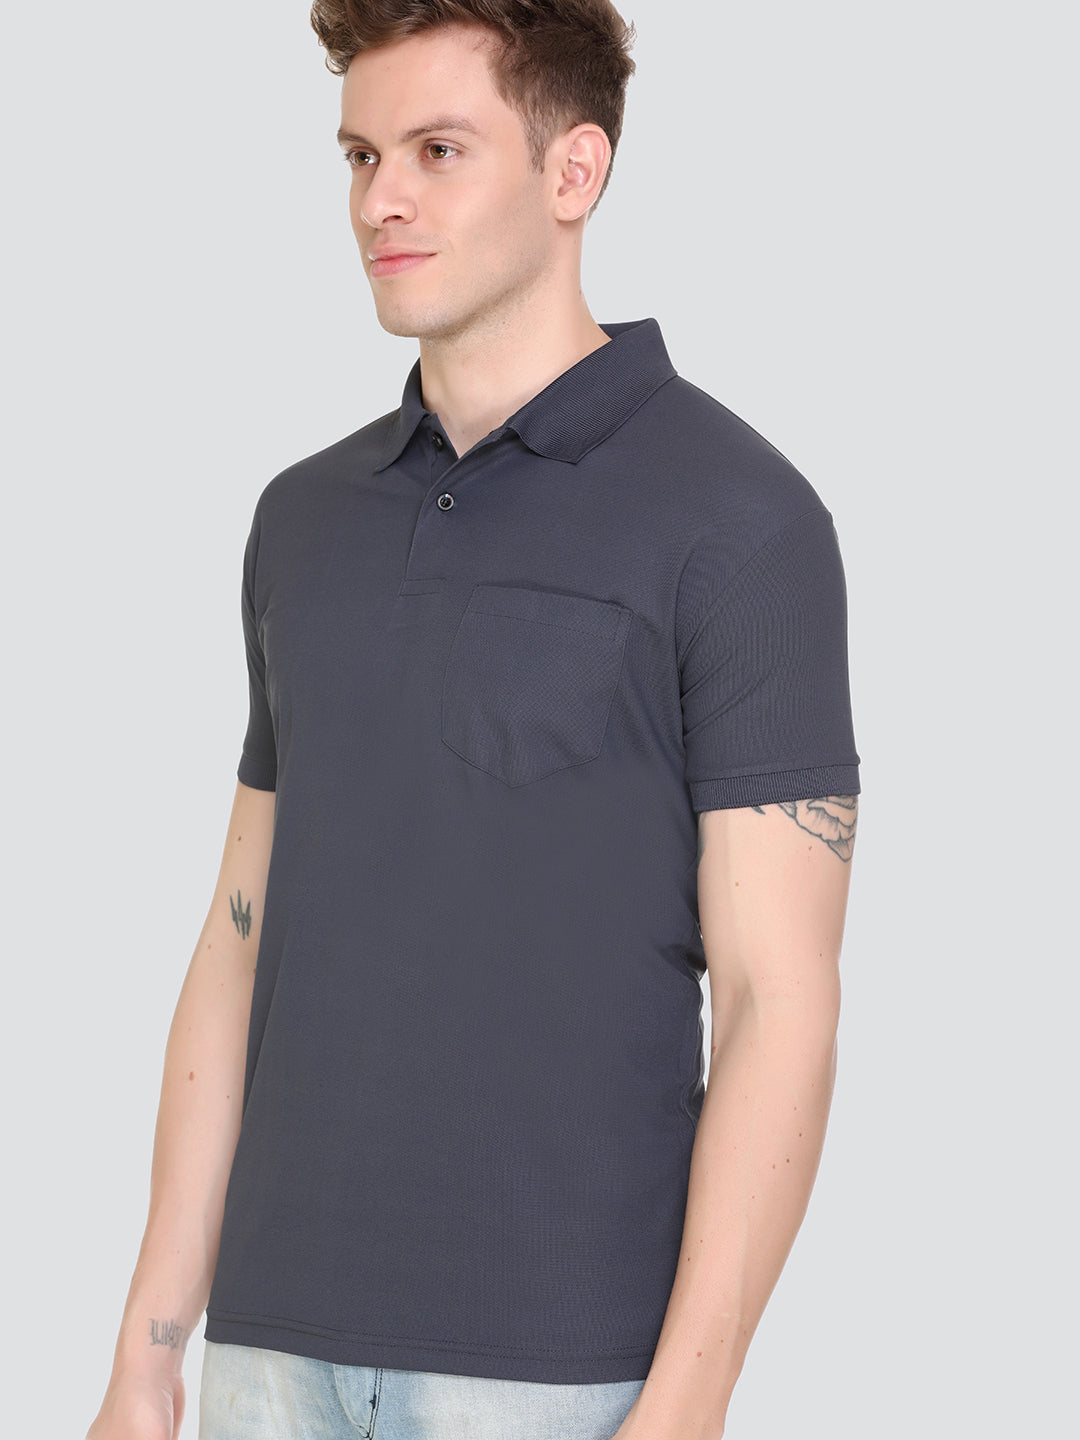 Comfortable Jinxer Hale Blue  Dry Fit Polo Neck T Shirt for men online in India